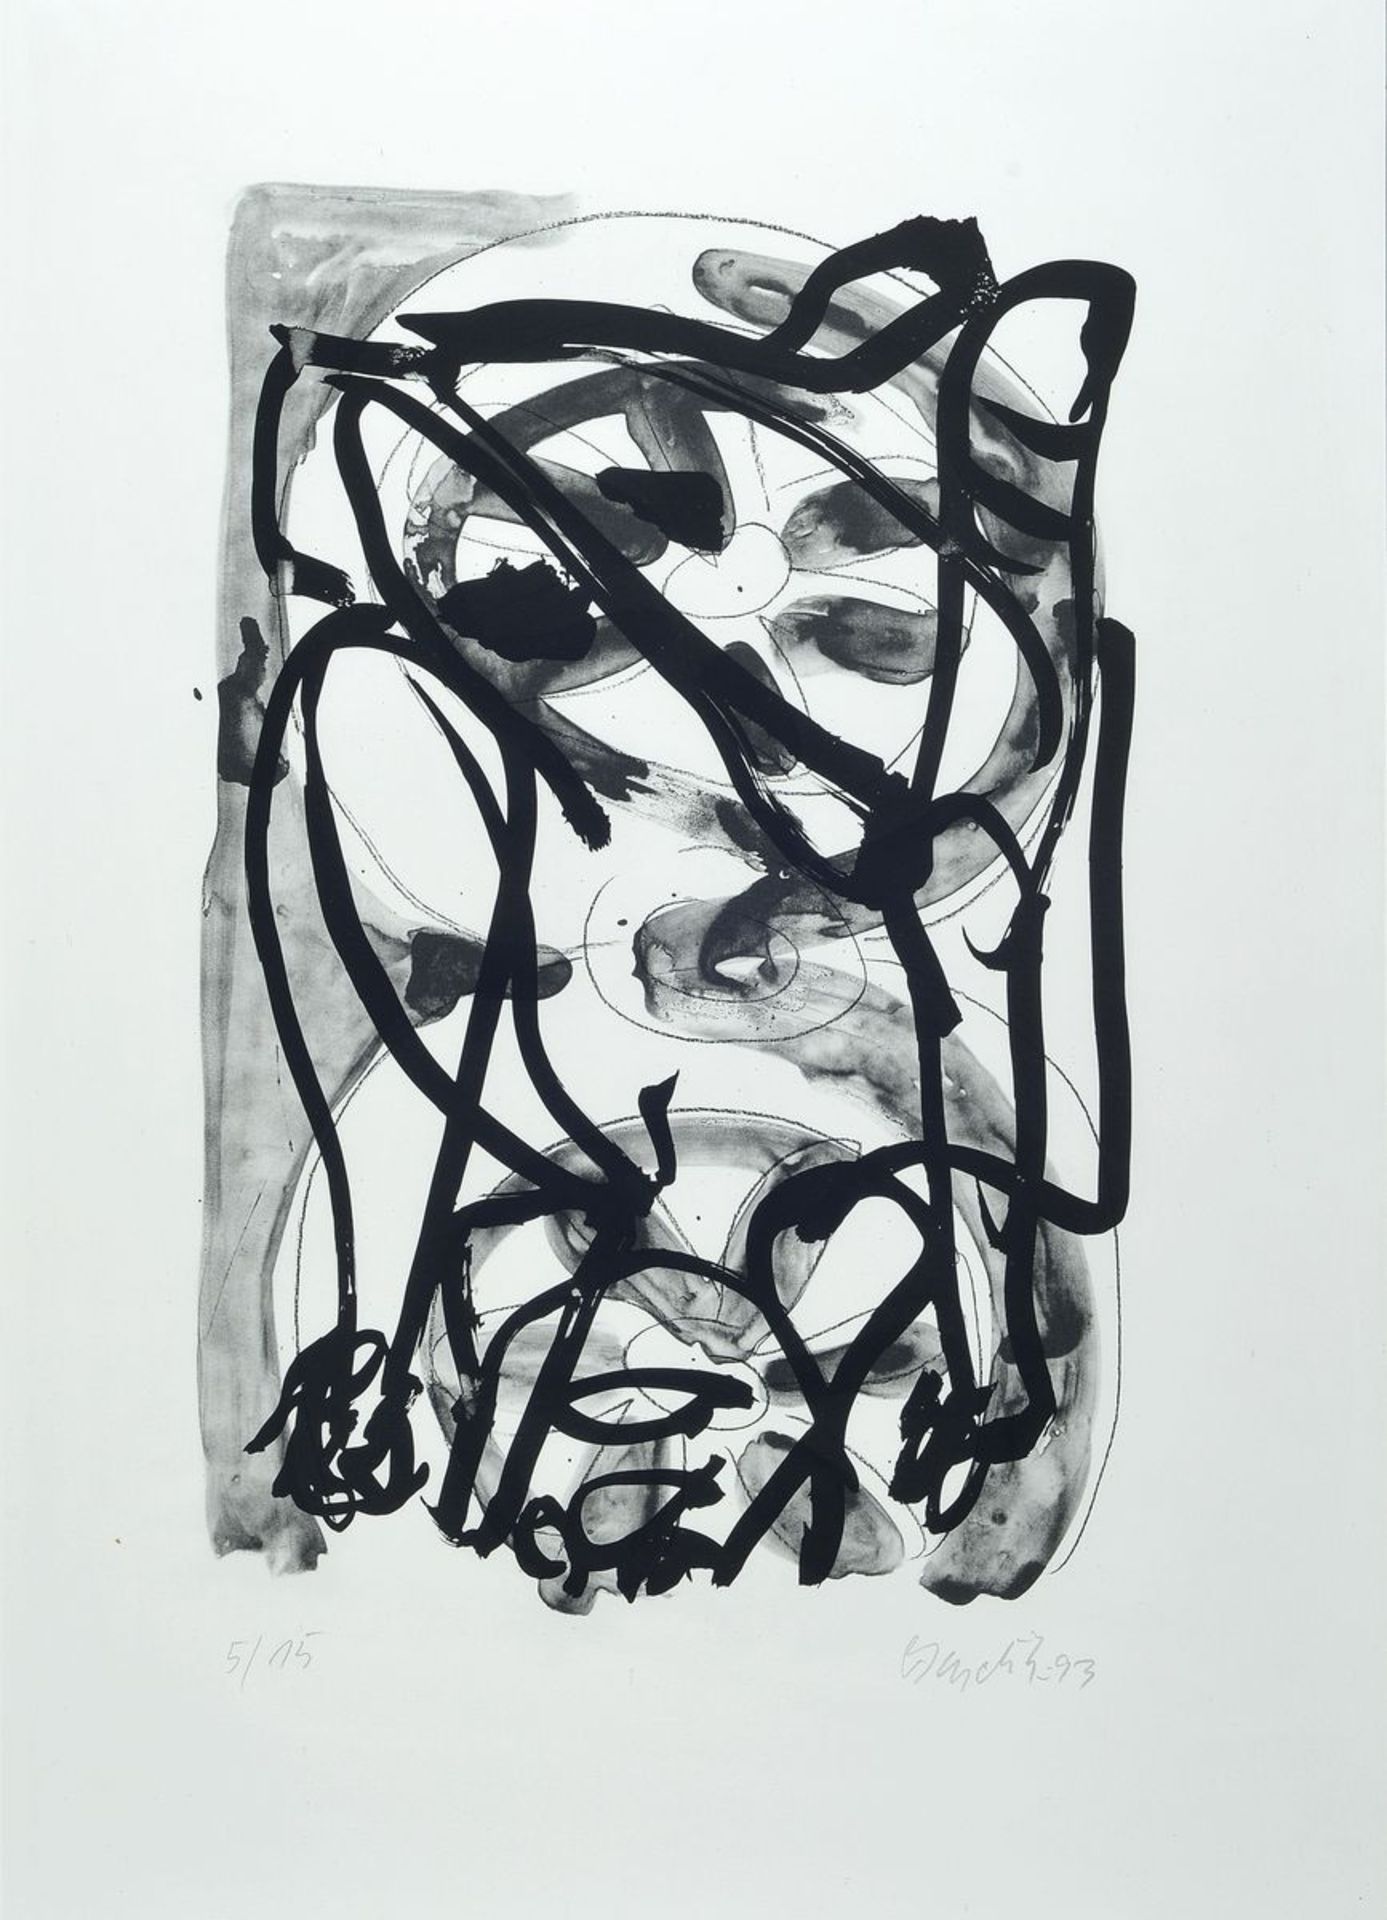 Georg Baselitz, born 1938, lithograph in small edition, on thick wove paper, num. 5/15, from 1993,